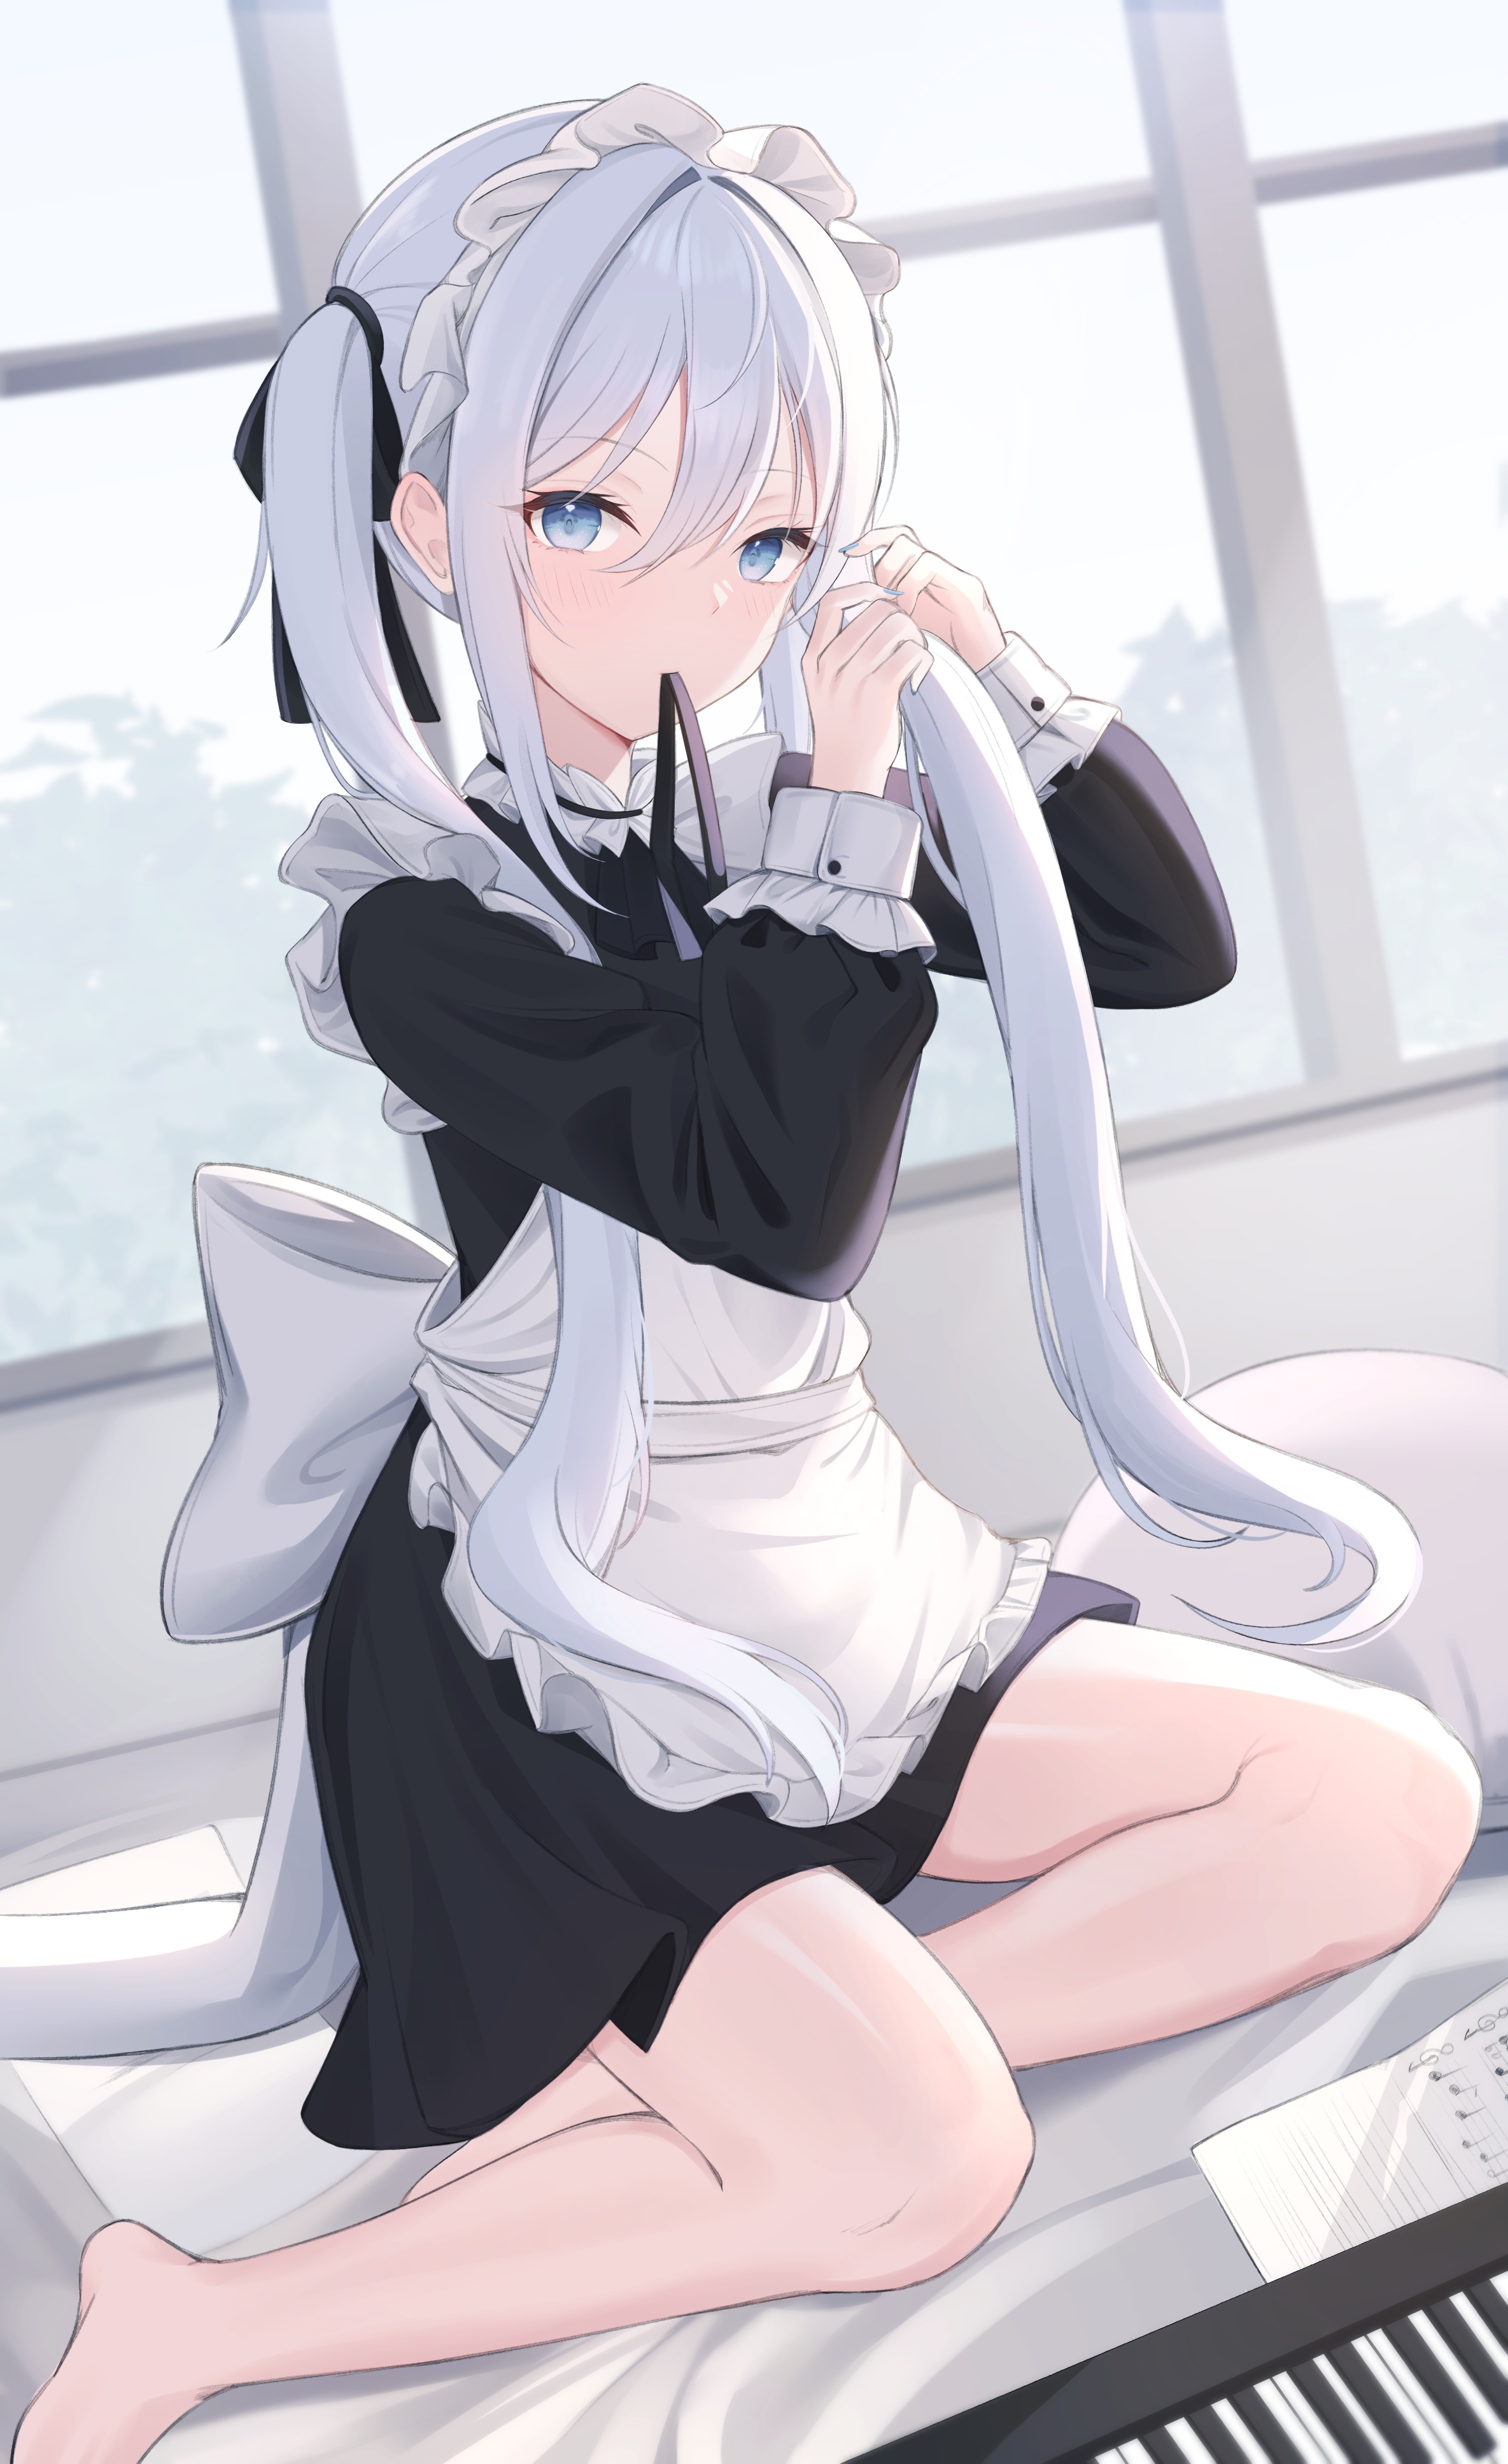 Maid of the Day — Today's Maid of the Day: Kotonoha Kanade